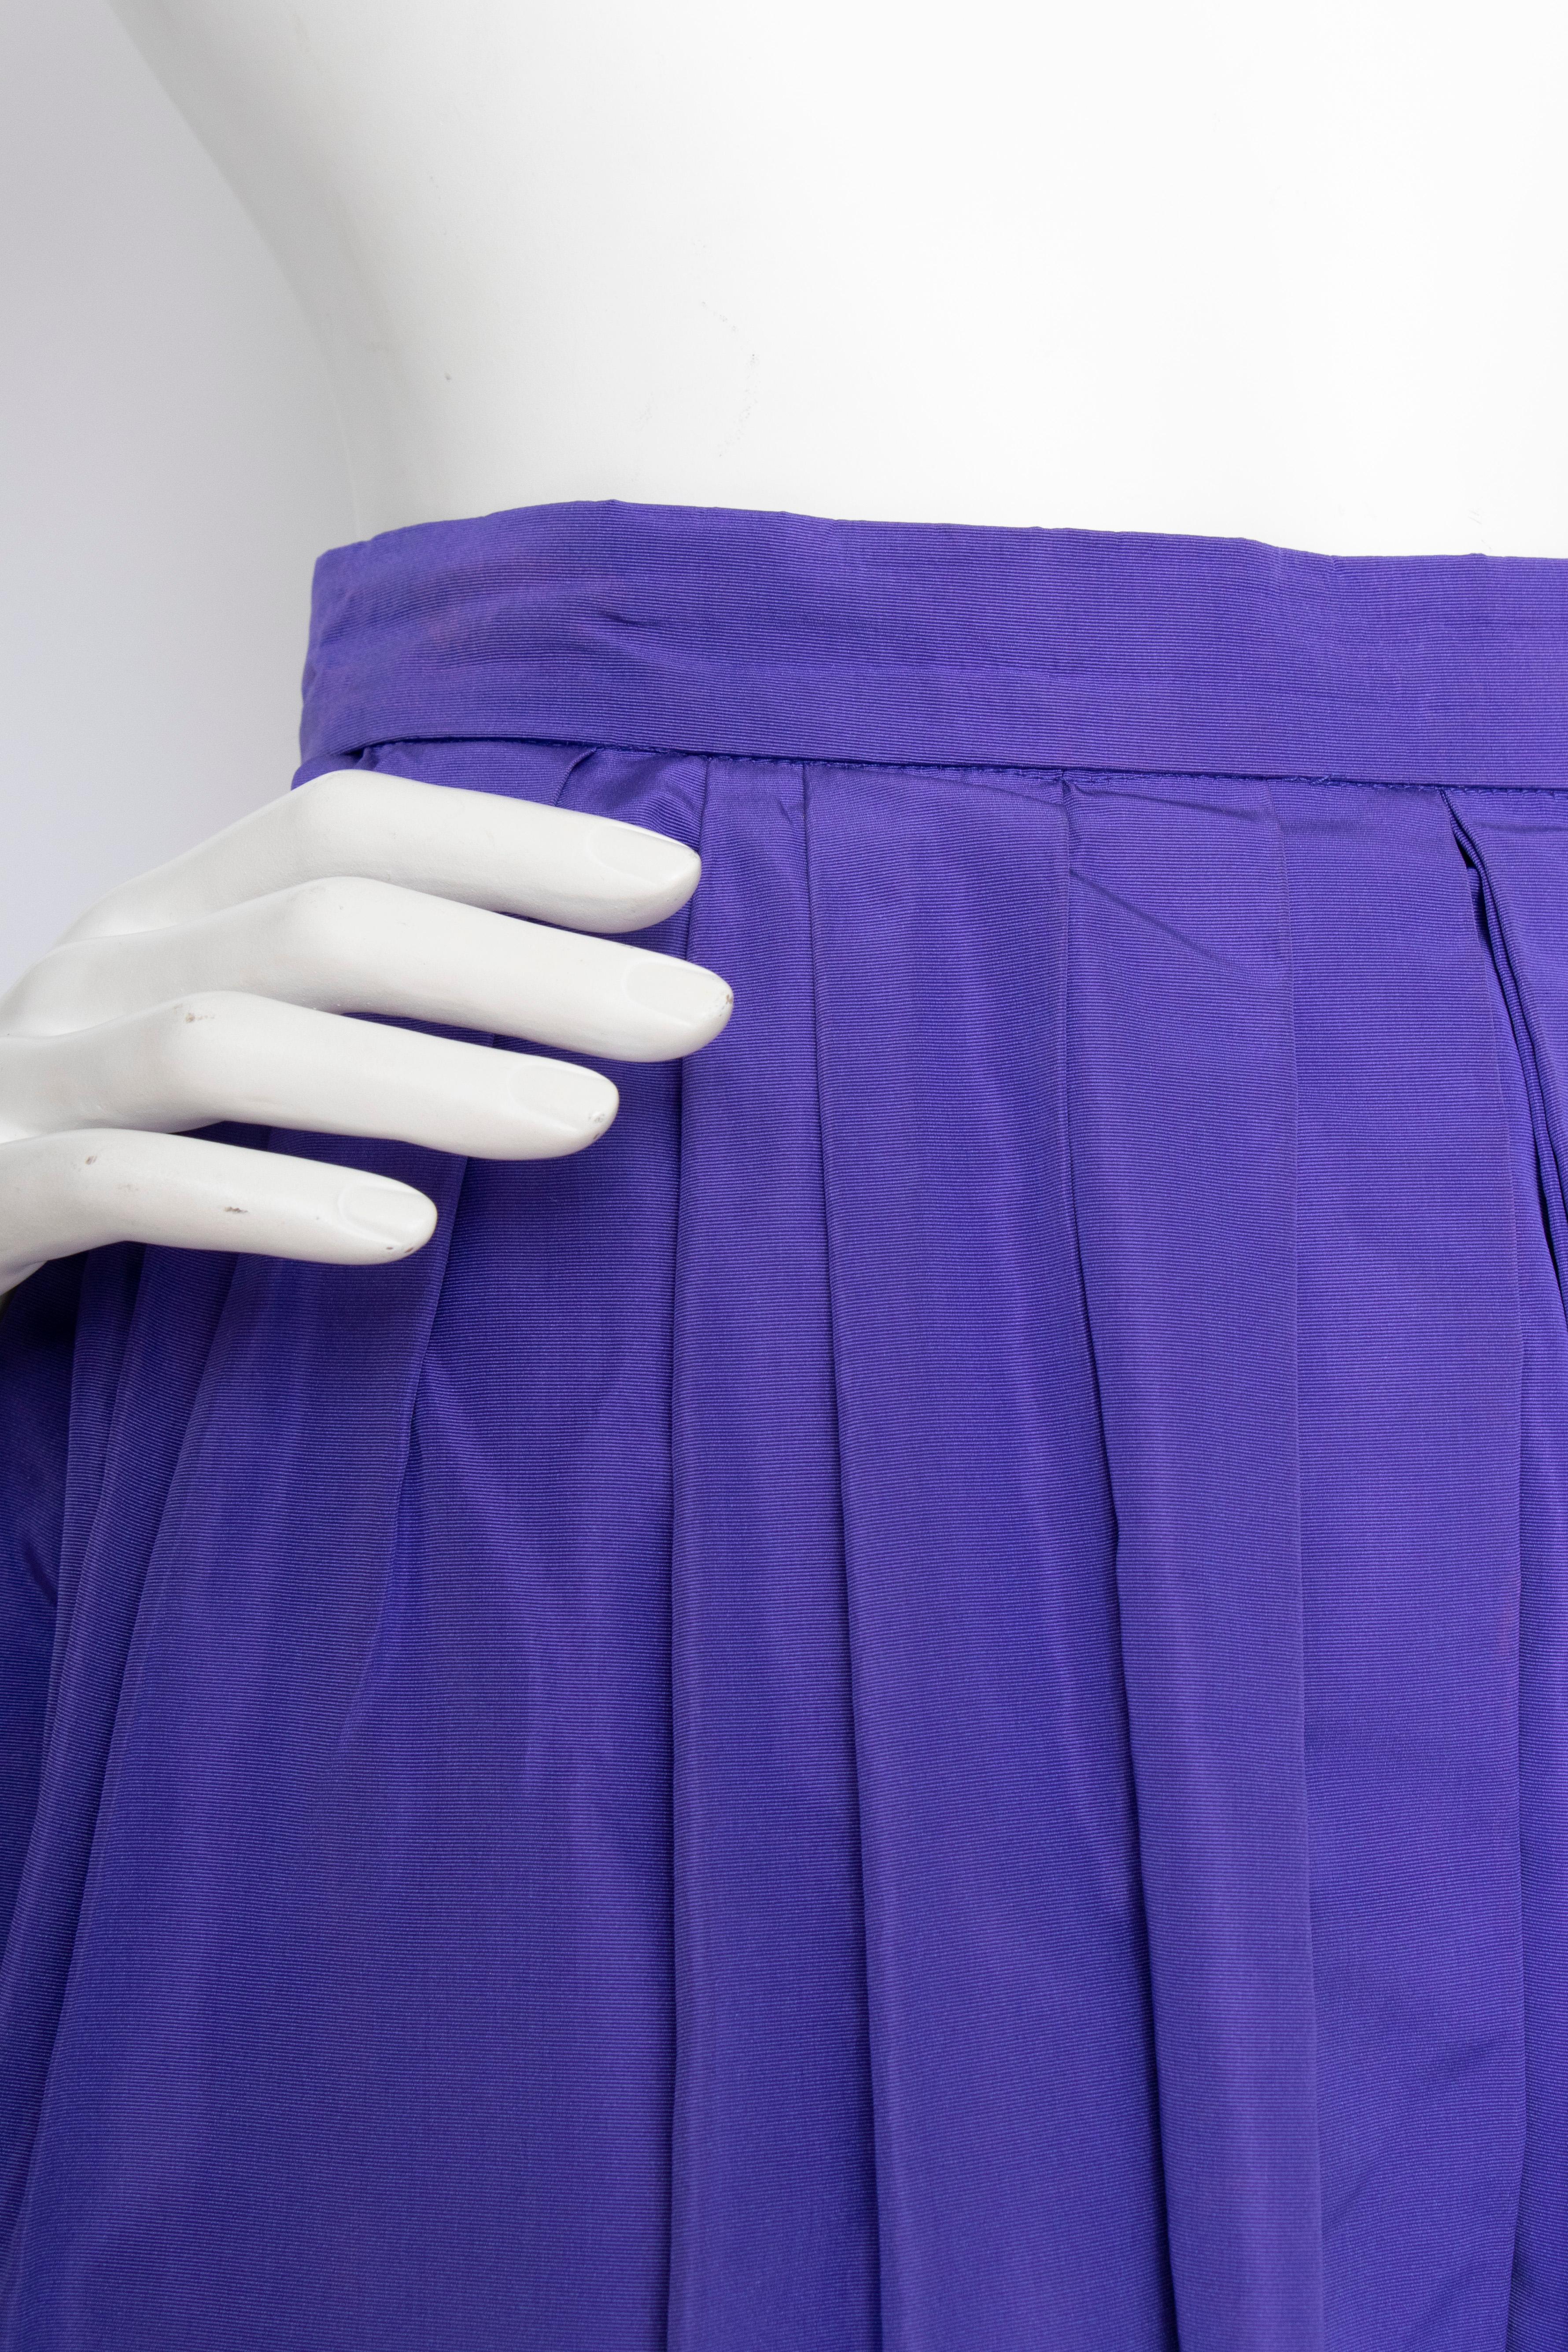 A 1980s Vintage Yves Saint Laurent Rive Gauche bold purple silk taffeta skirt with a fitted waist, zipper closure and large pleats. The skirt is unlined and has side pockets. 

The size of the skirt corresponds to a modern size Small, but please see